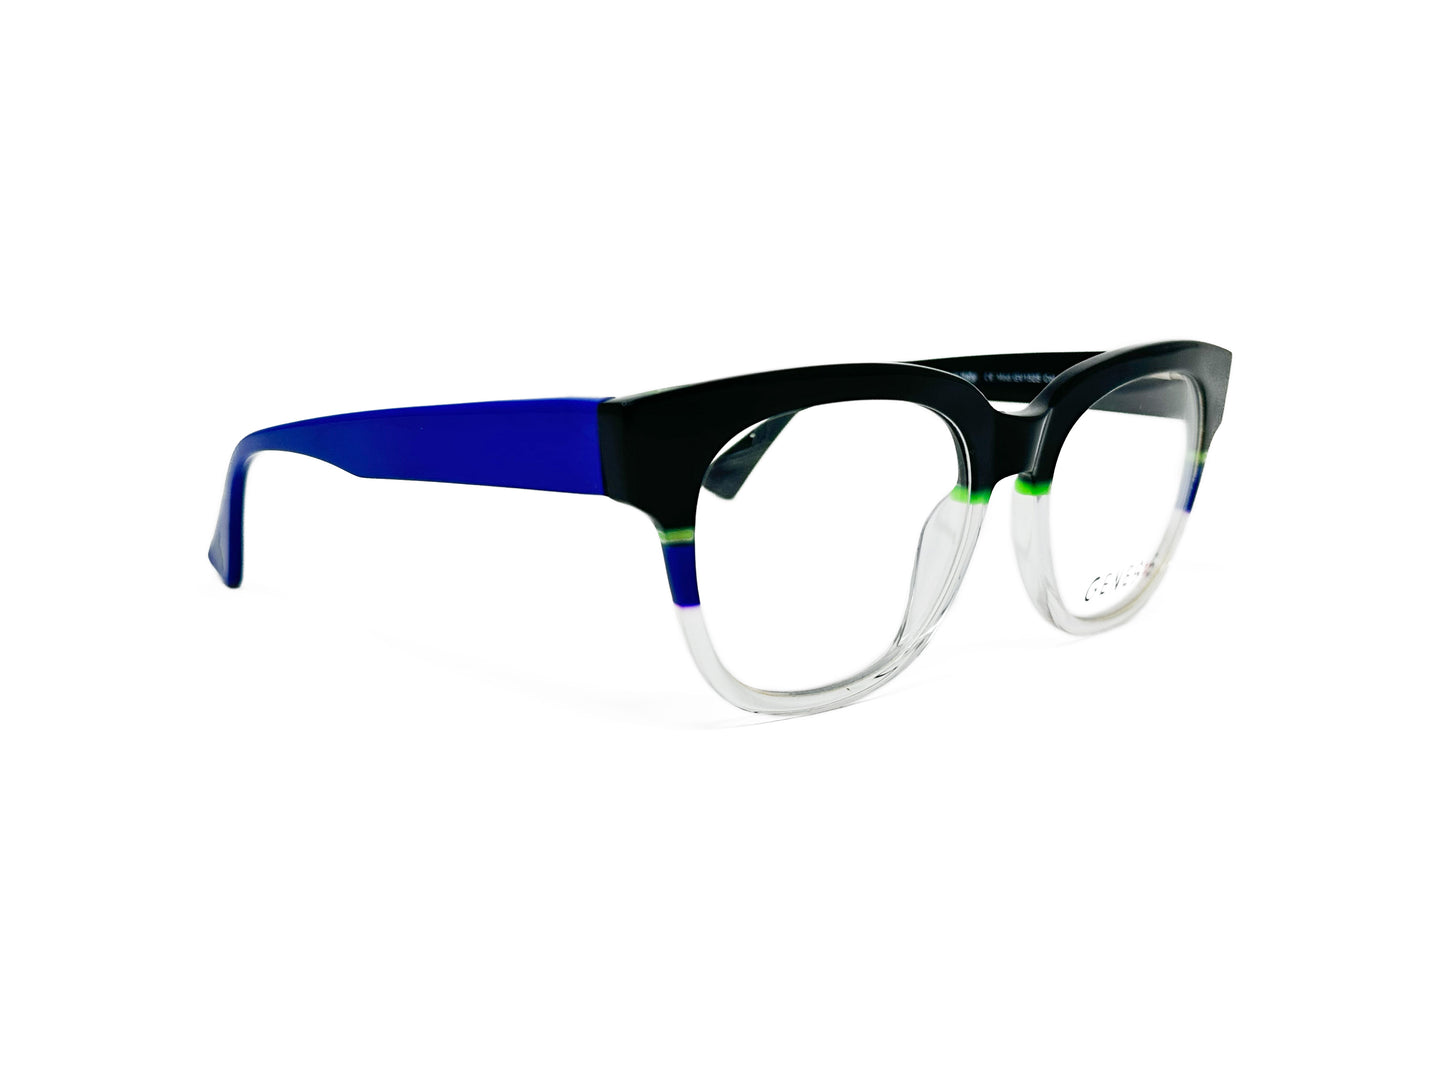 Genesis rounded-square, acetate optical frame. Model: GV1525. Color: Black top with neon green and blue stipe to clear transparent bottom. Side view.